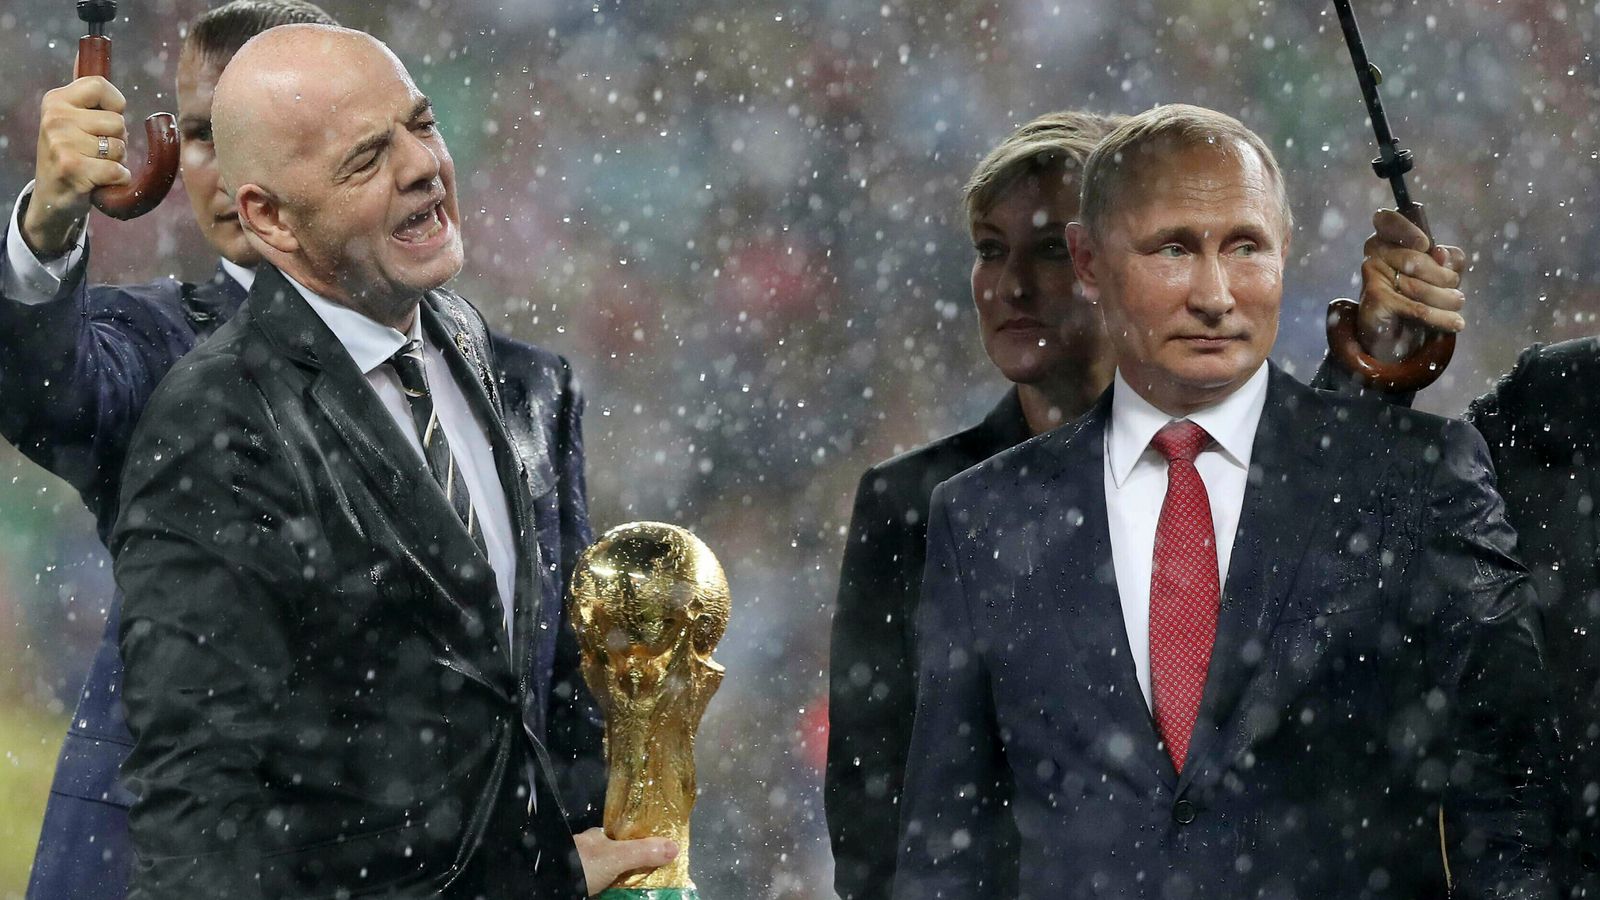 FIFA in advanced talks to suspend Russia until further notice